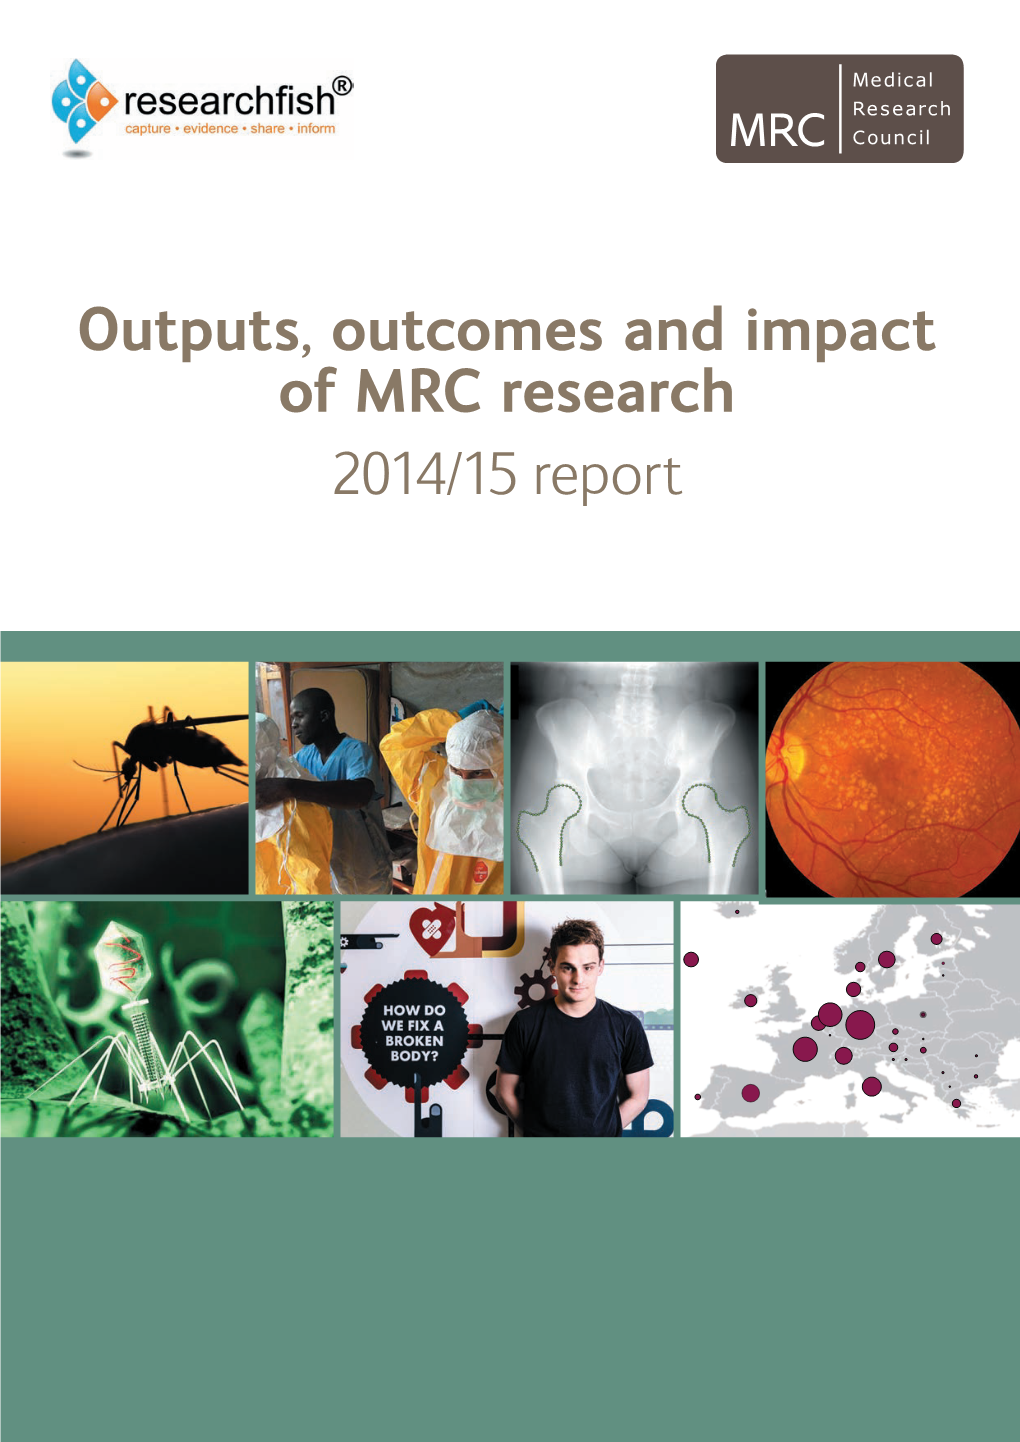 Outputs, Outcomes and Impact of MRC Research 2014/15 Report